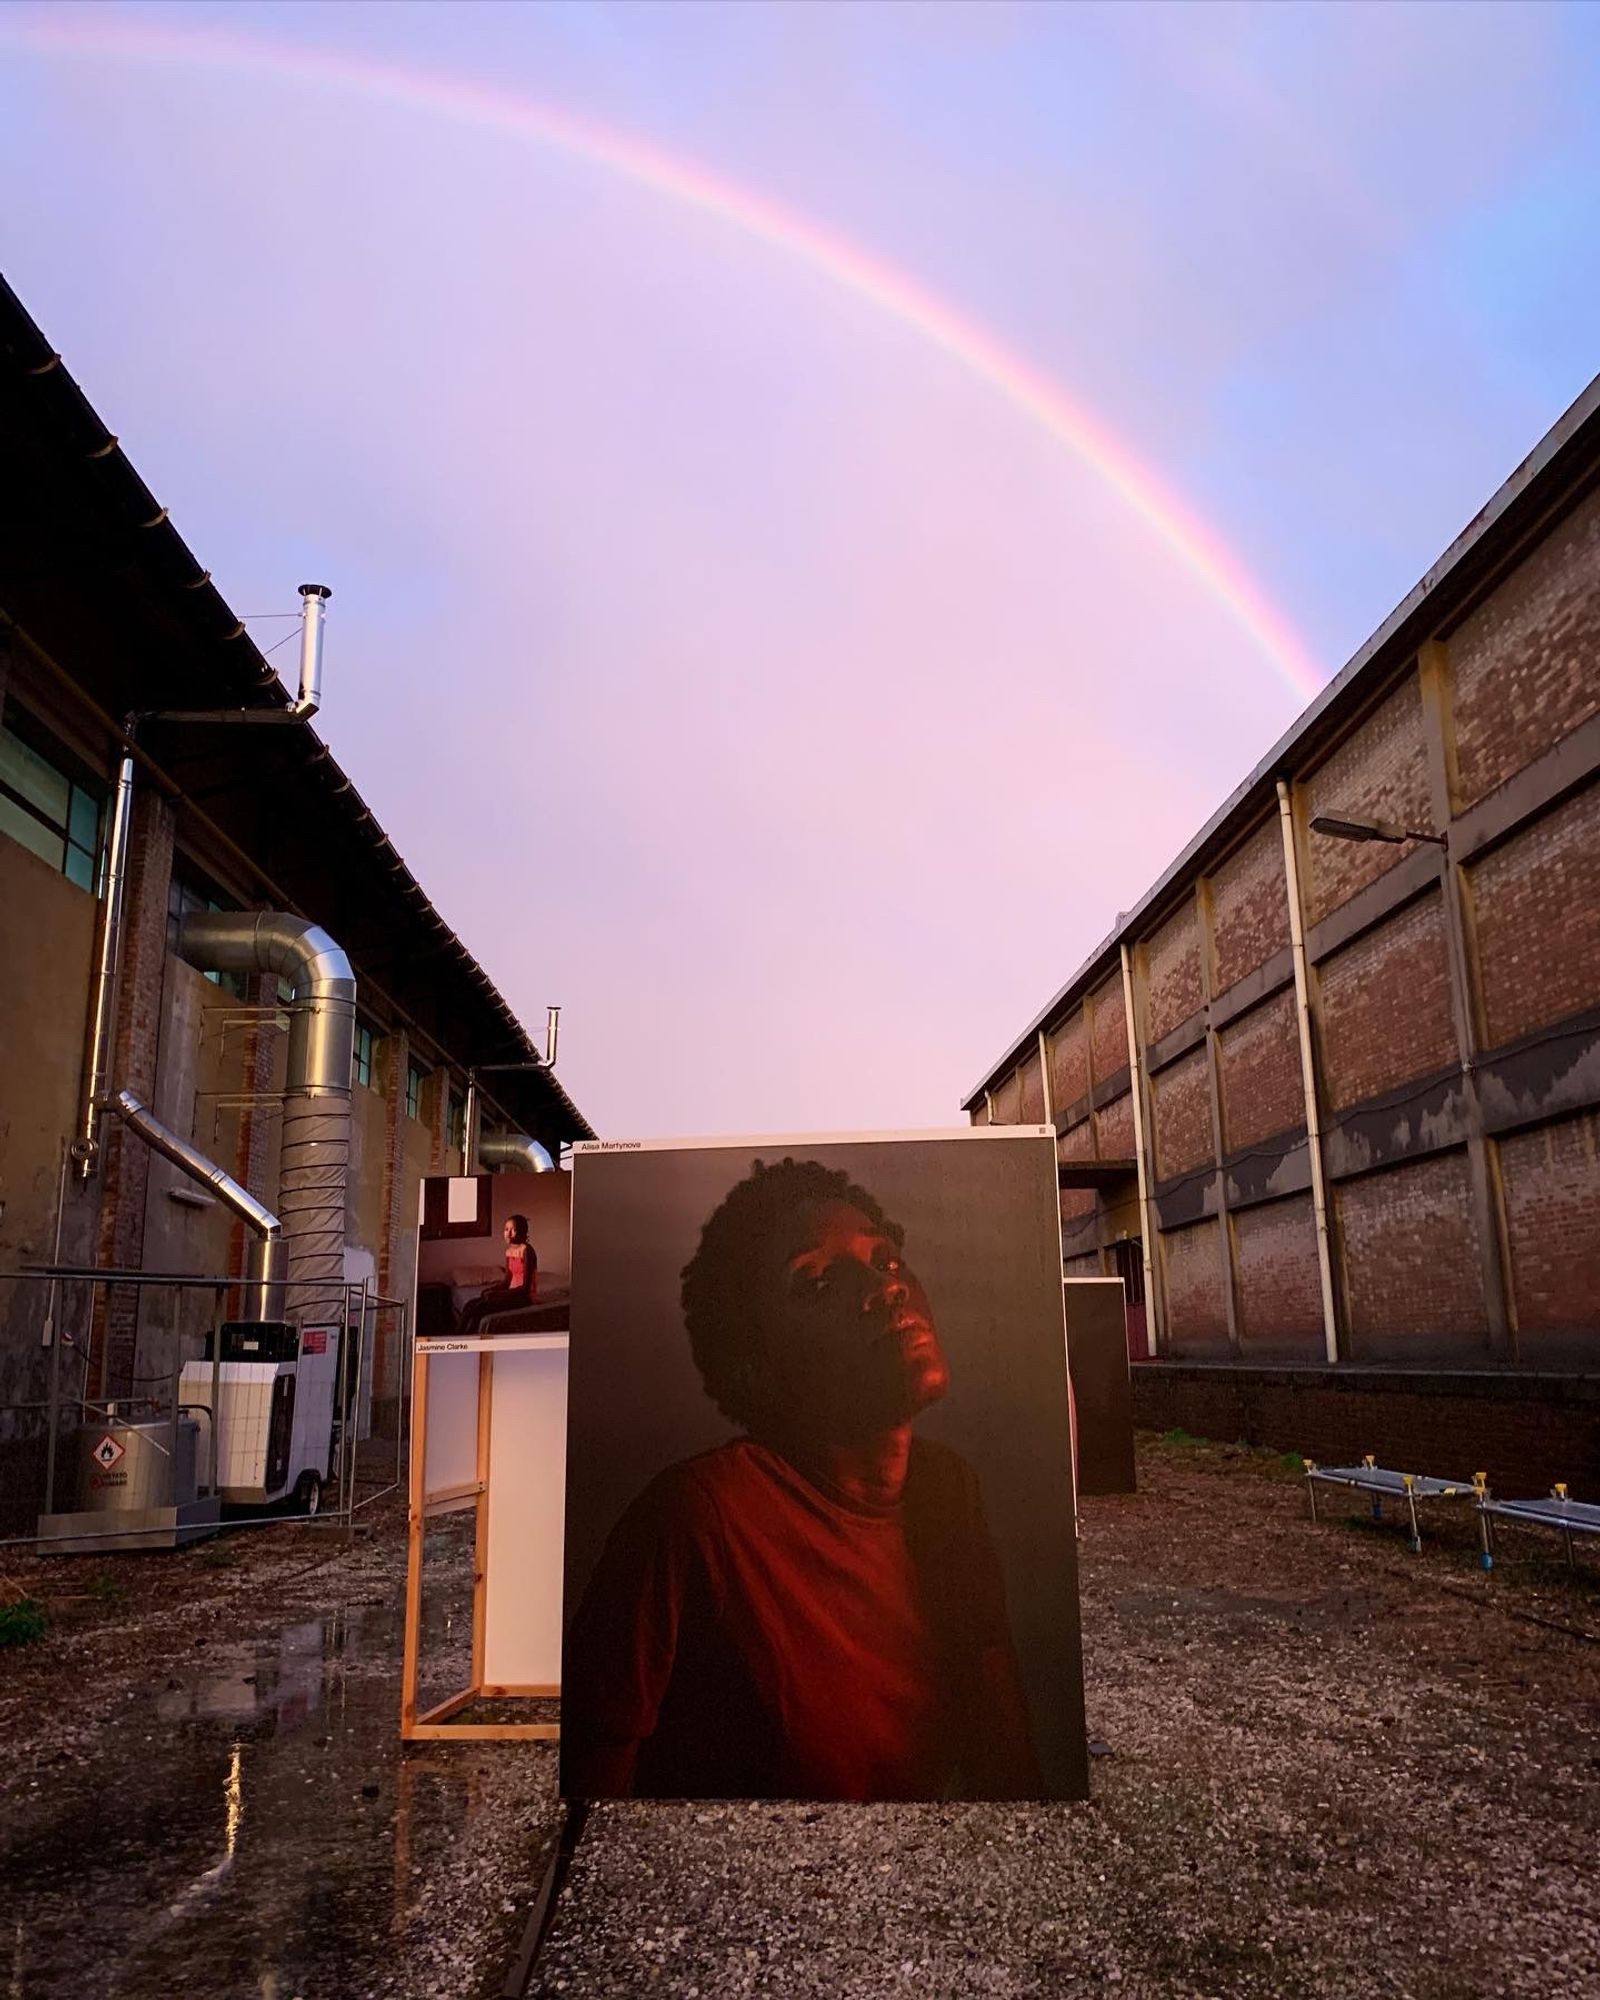 The rainbow after Sunday's thunderstorm salutes this first edition © PhMuseum